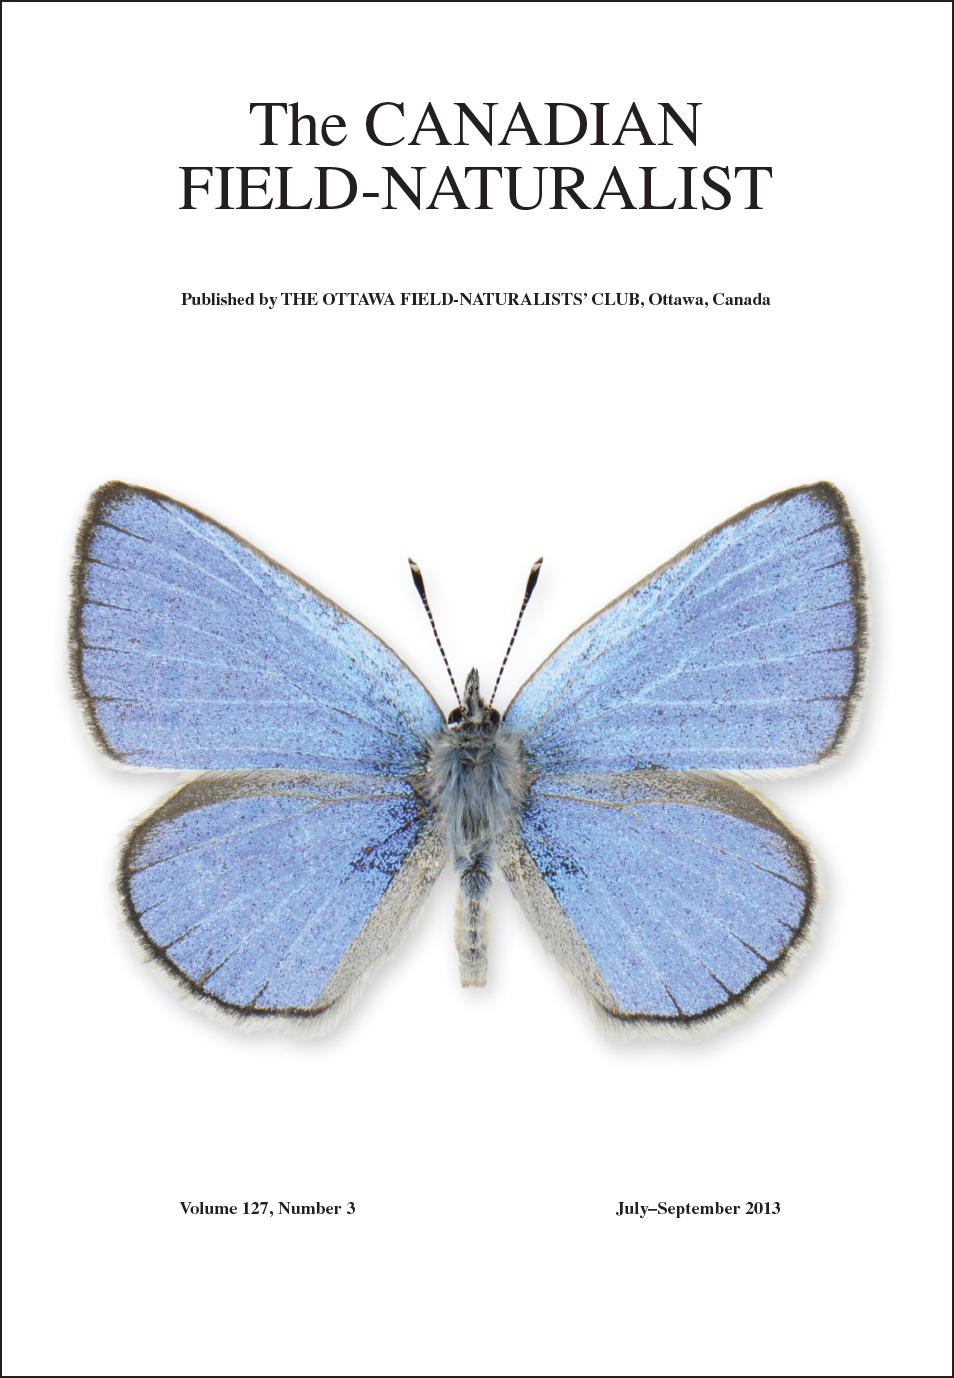 Cover photo (butterfly) vol 127 issue 3, The Canadian Field-Naturalist